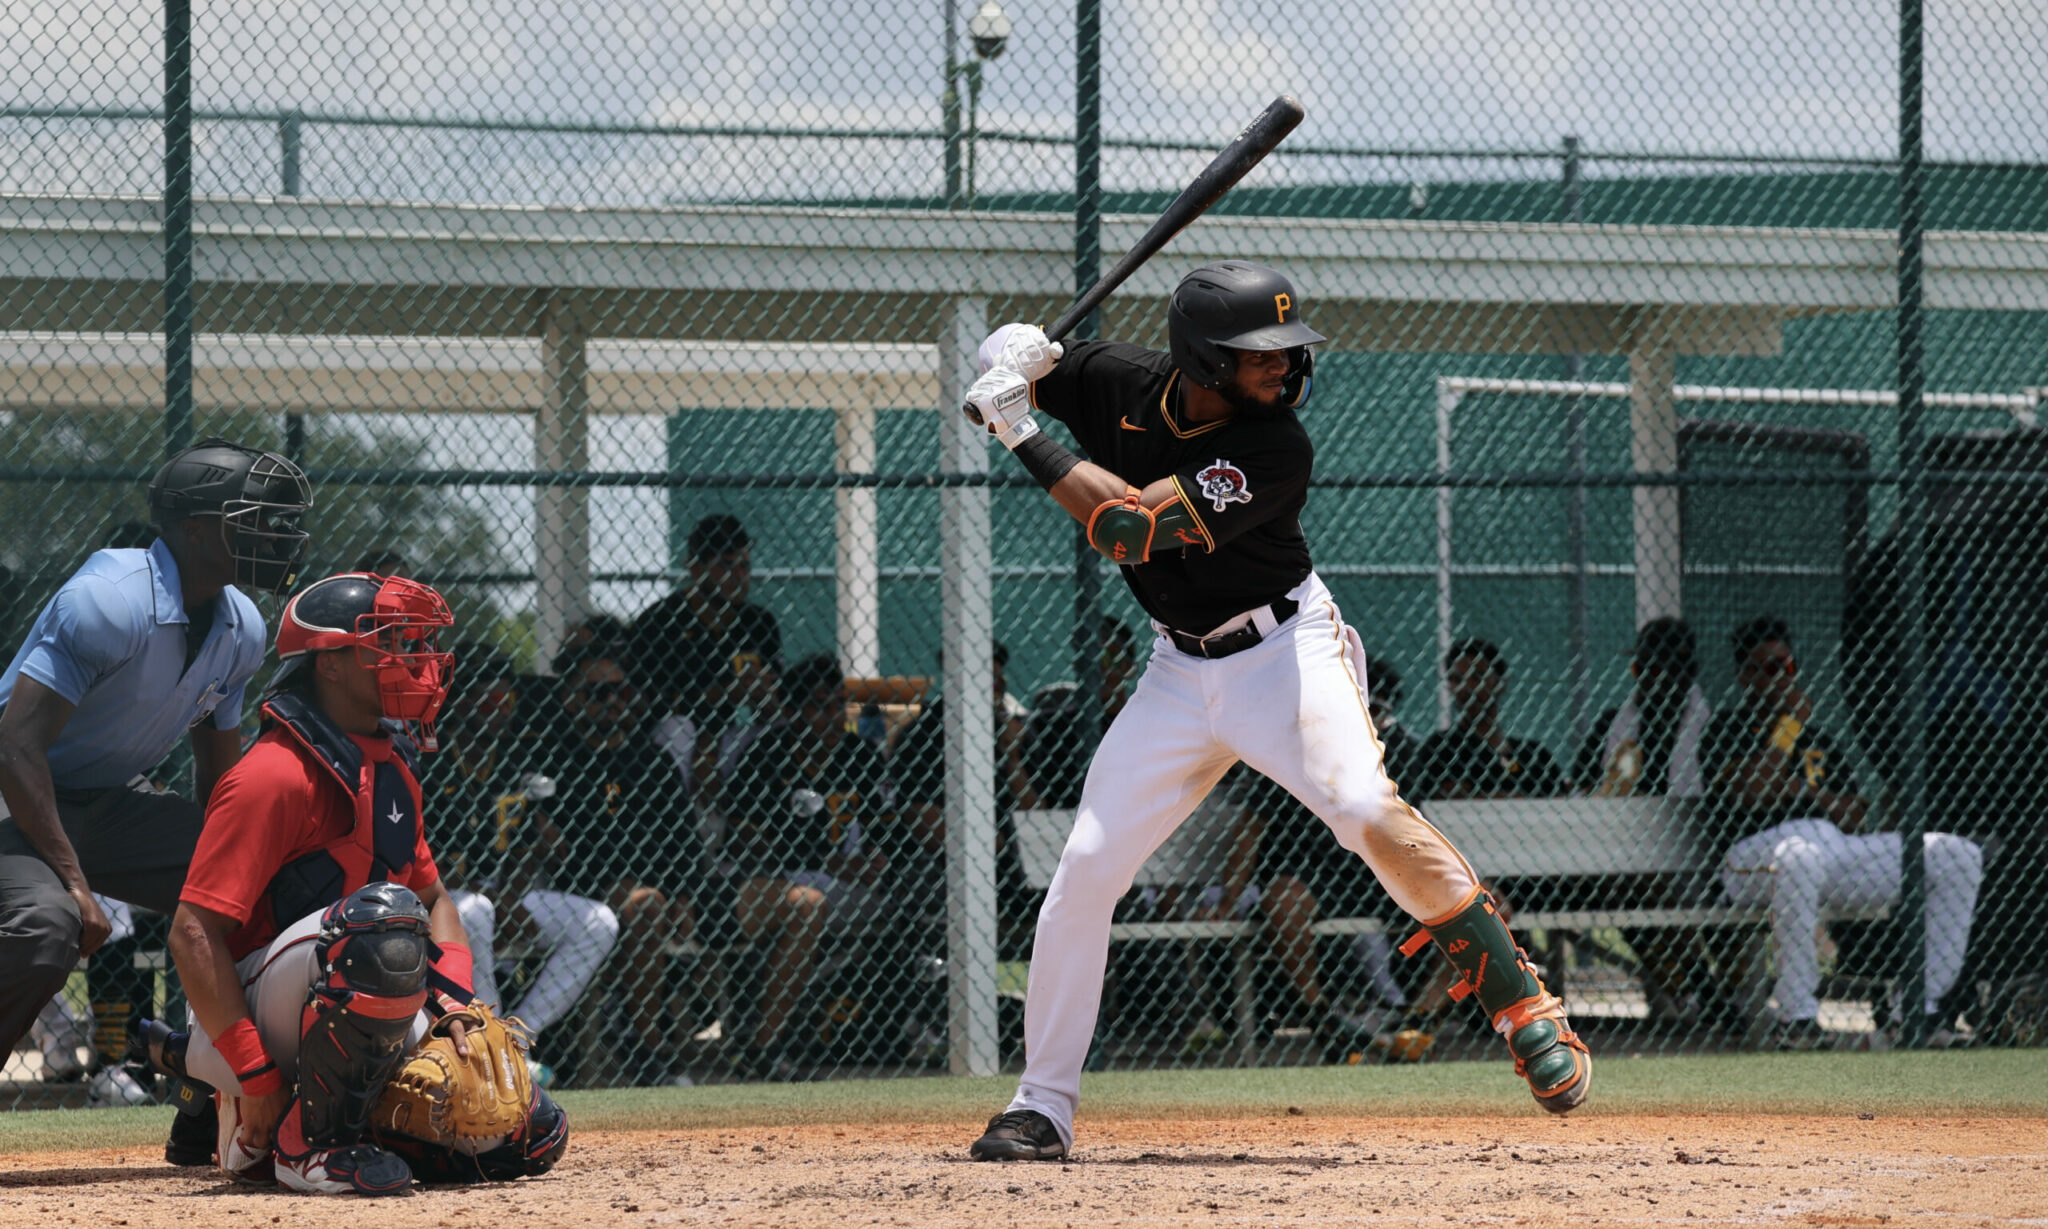 Pirates Prospects Daily: Maikol Escotto has an Encouraging Day at the Plate